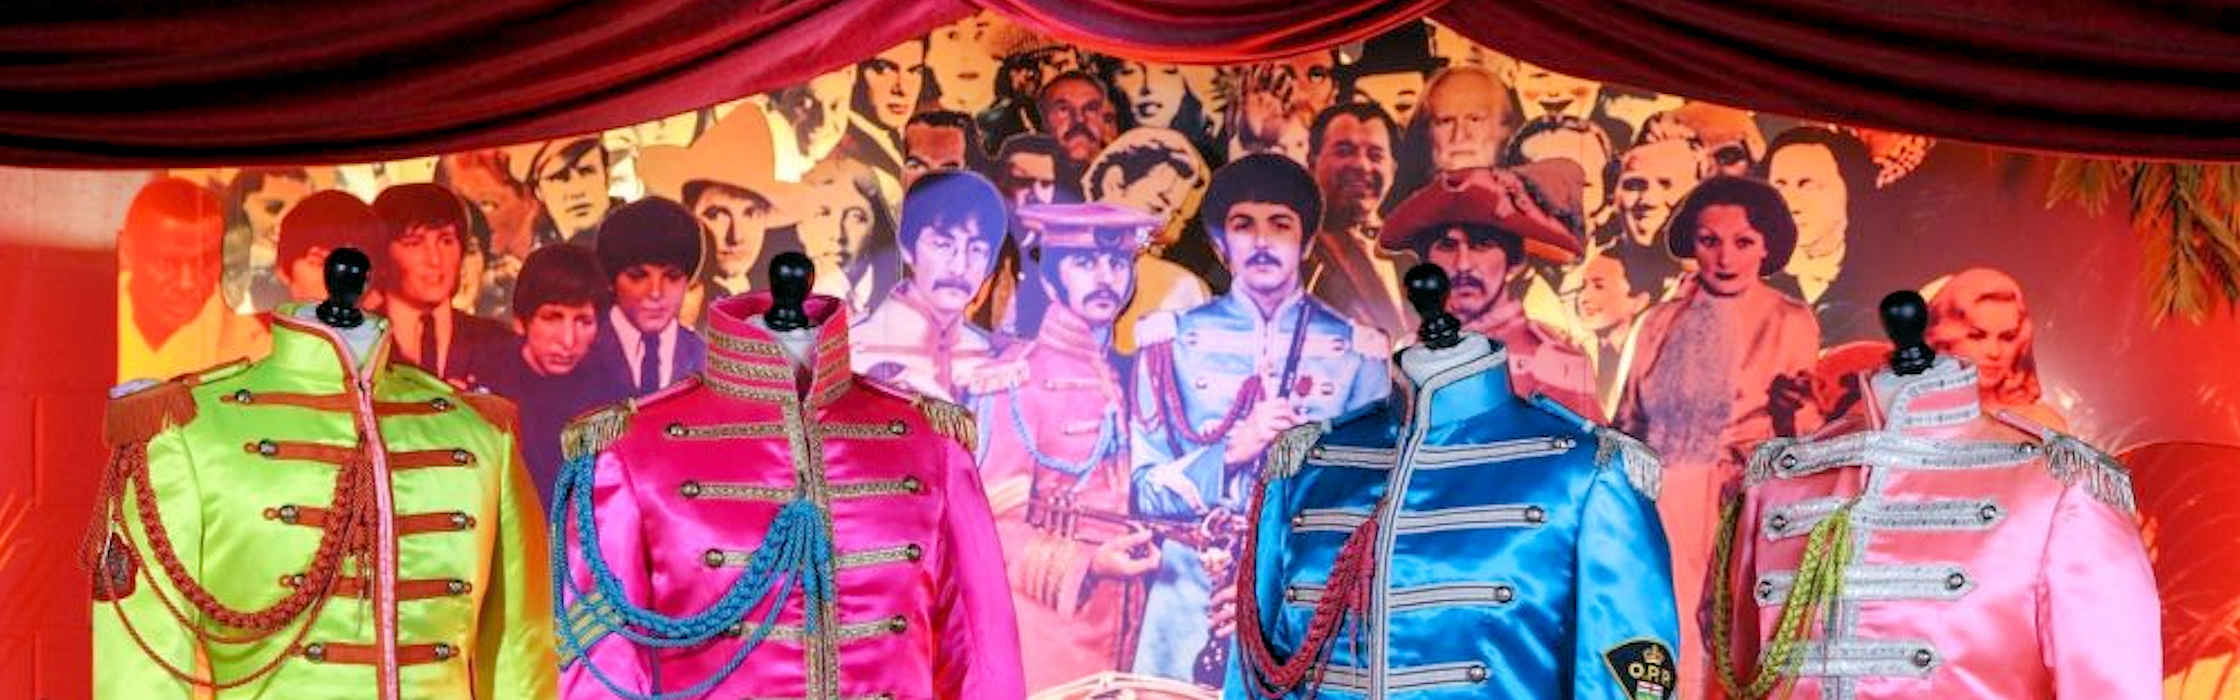 What's On at The Beatles Story Experience, Liverpool